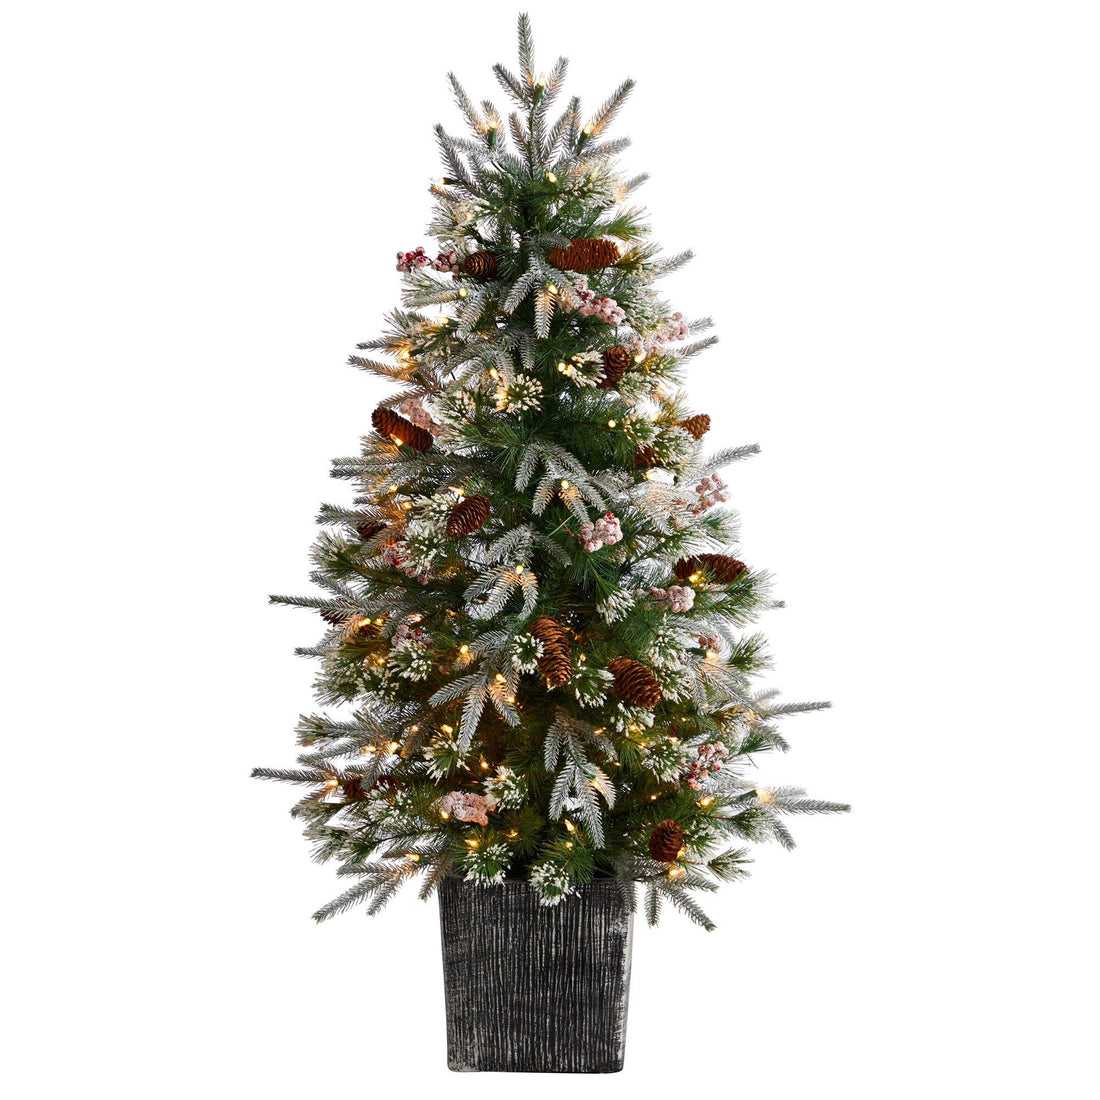 4' Frosted Artificial Christmas Tree Pre-Lit with 105 lights in Decorative Planter